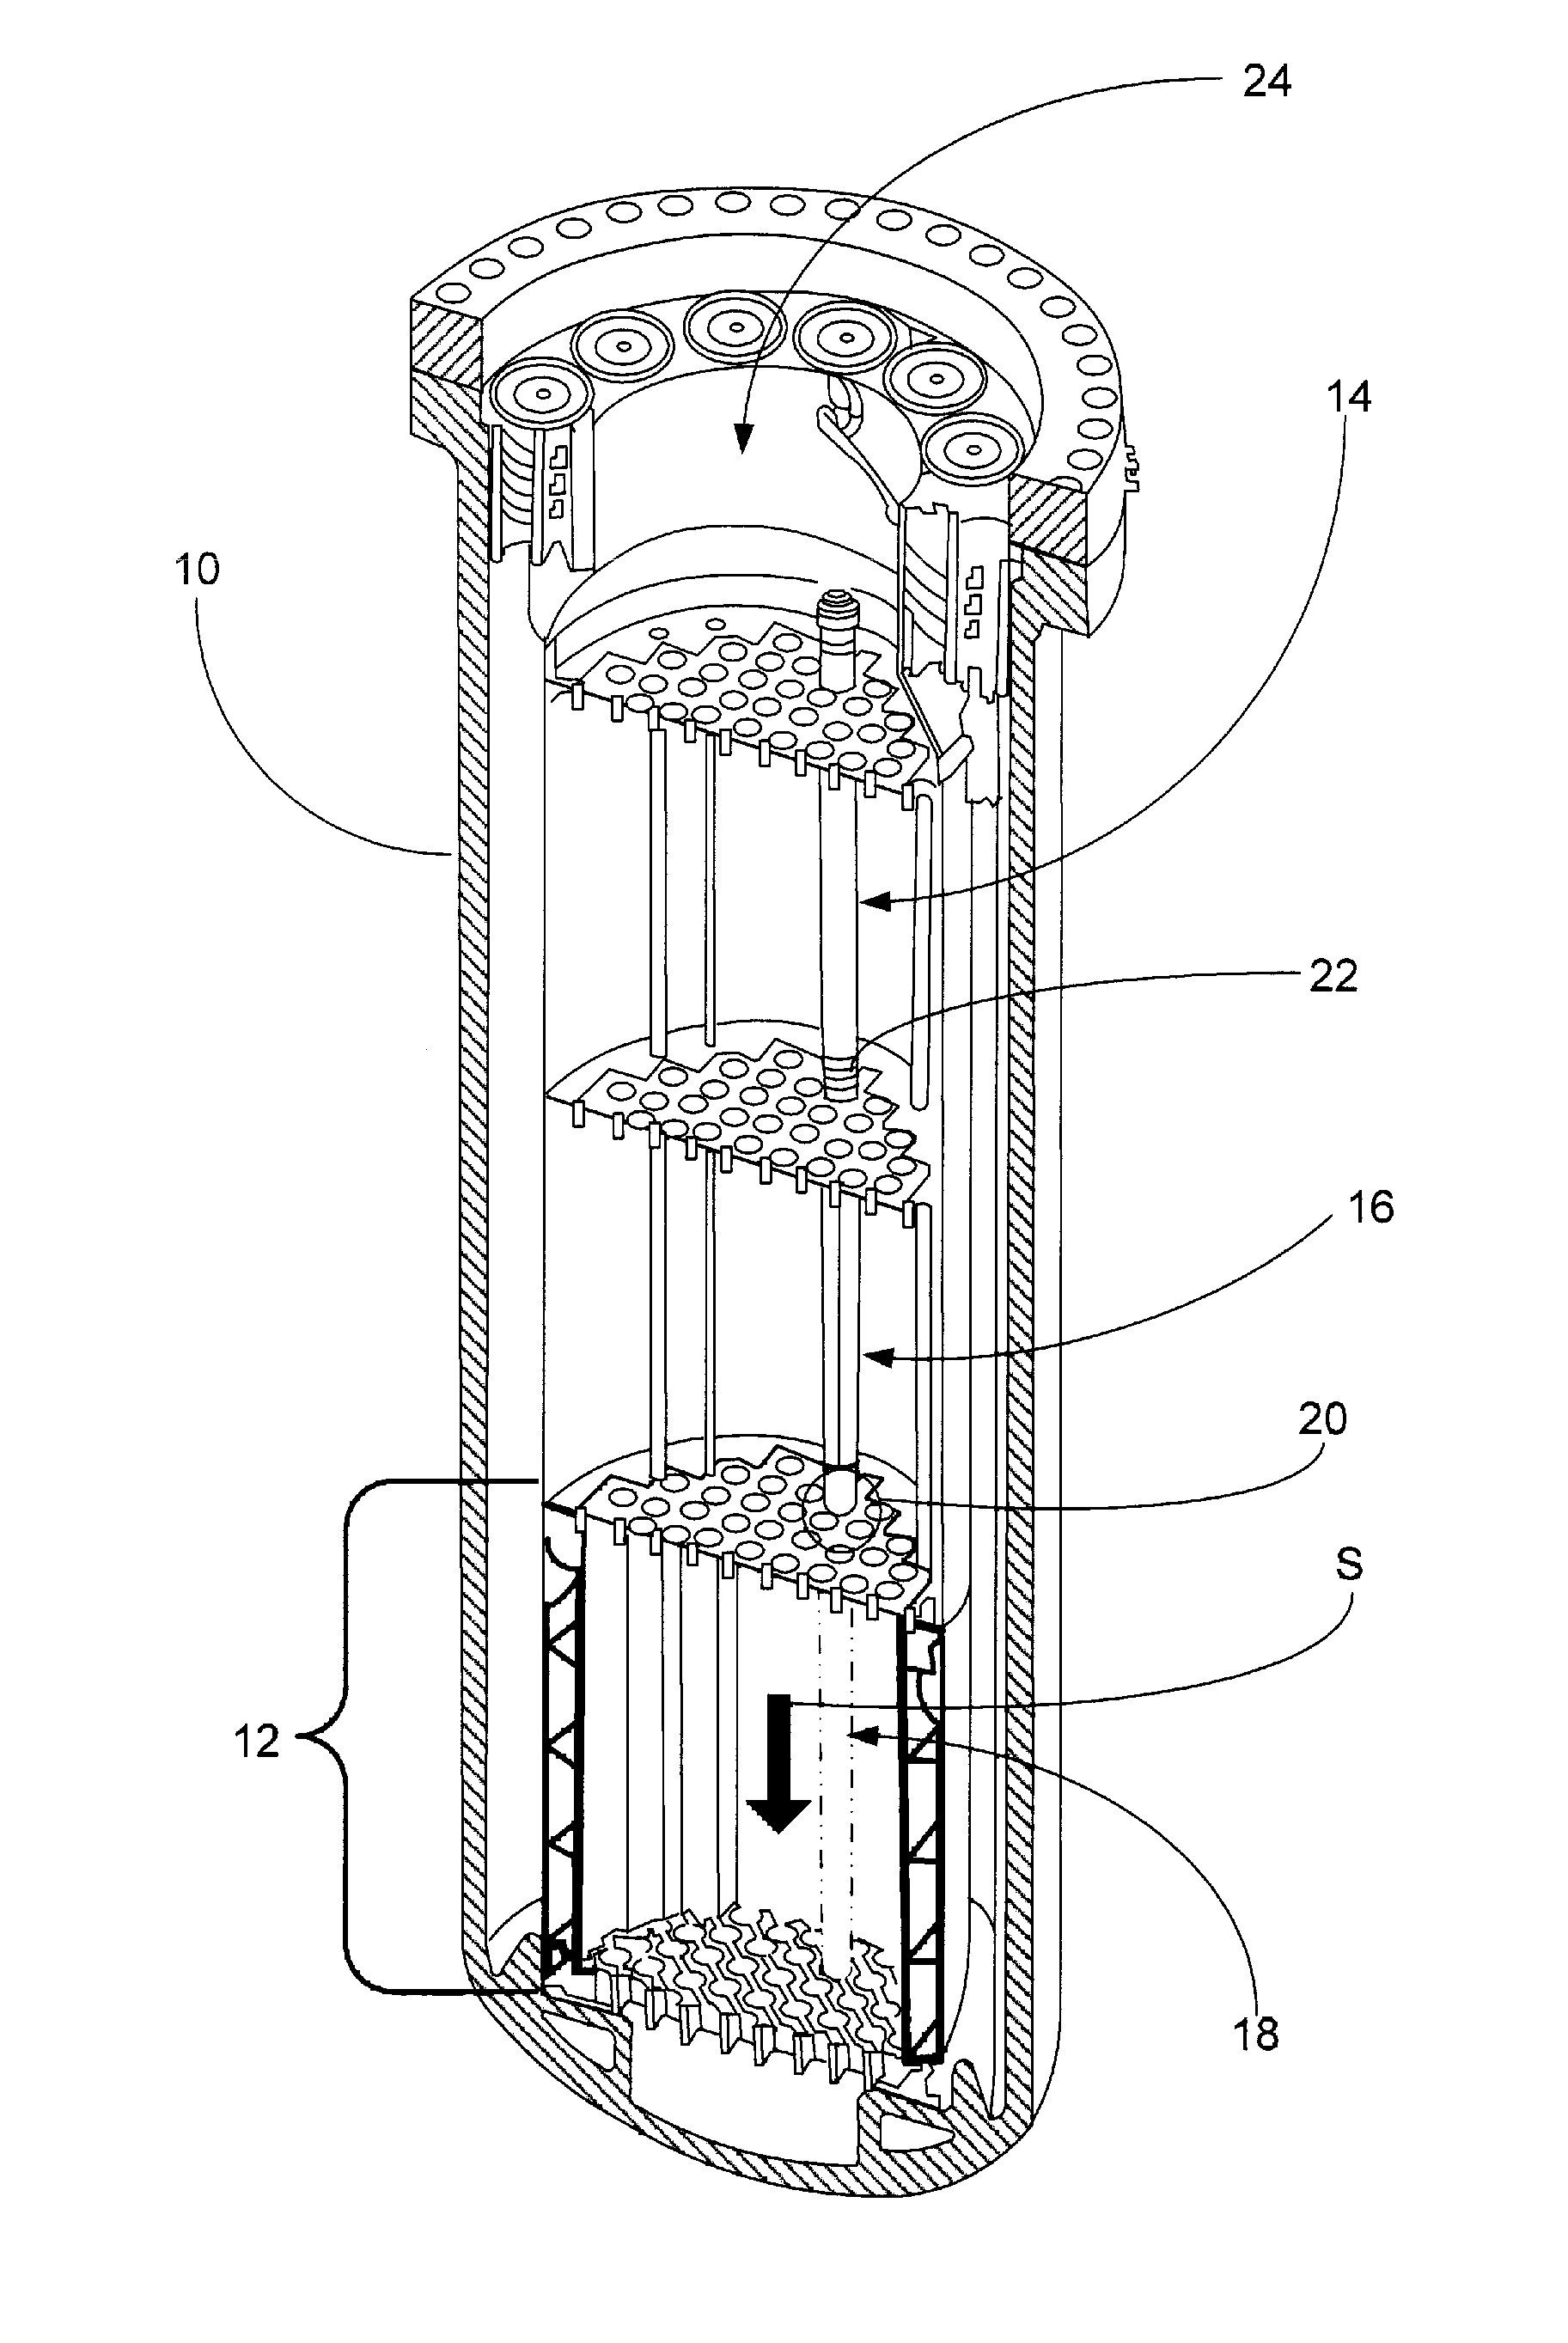 Terminal elements for coupling connecting rods and control rods in control rod assemblies for a nuclear reactor